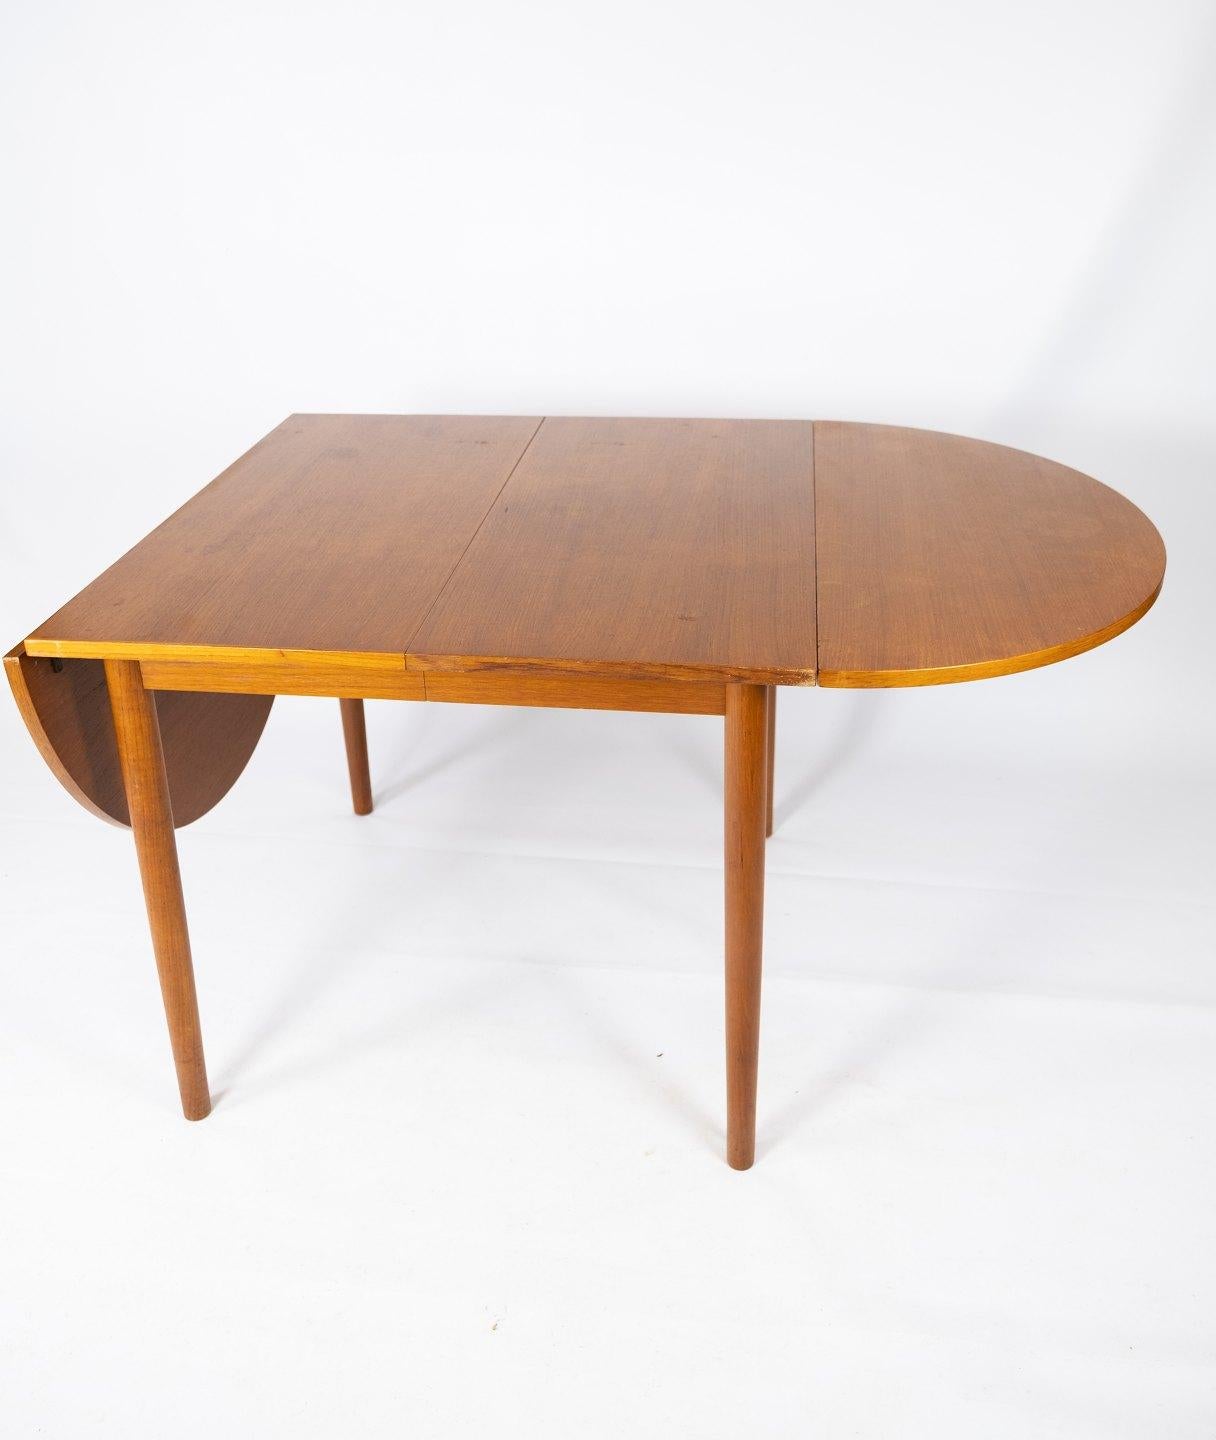 This teak dining table, designed by the renowned Danish furniture designer Arne Vodder in the 1960s, epitomizes the timeless elegance and functionality of Scandinavian design.

Crafted from high-quality teak wood, prized for its durability and